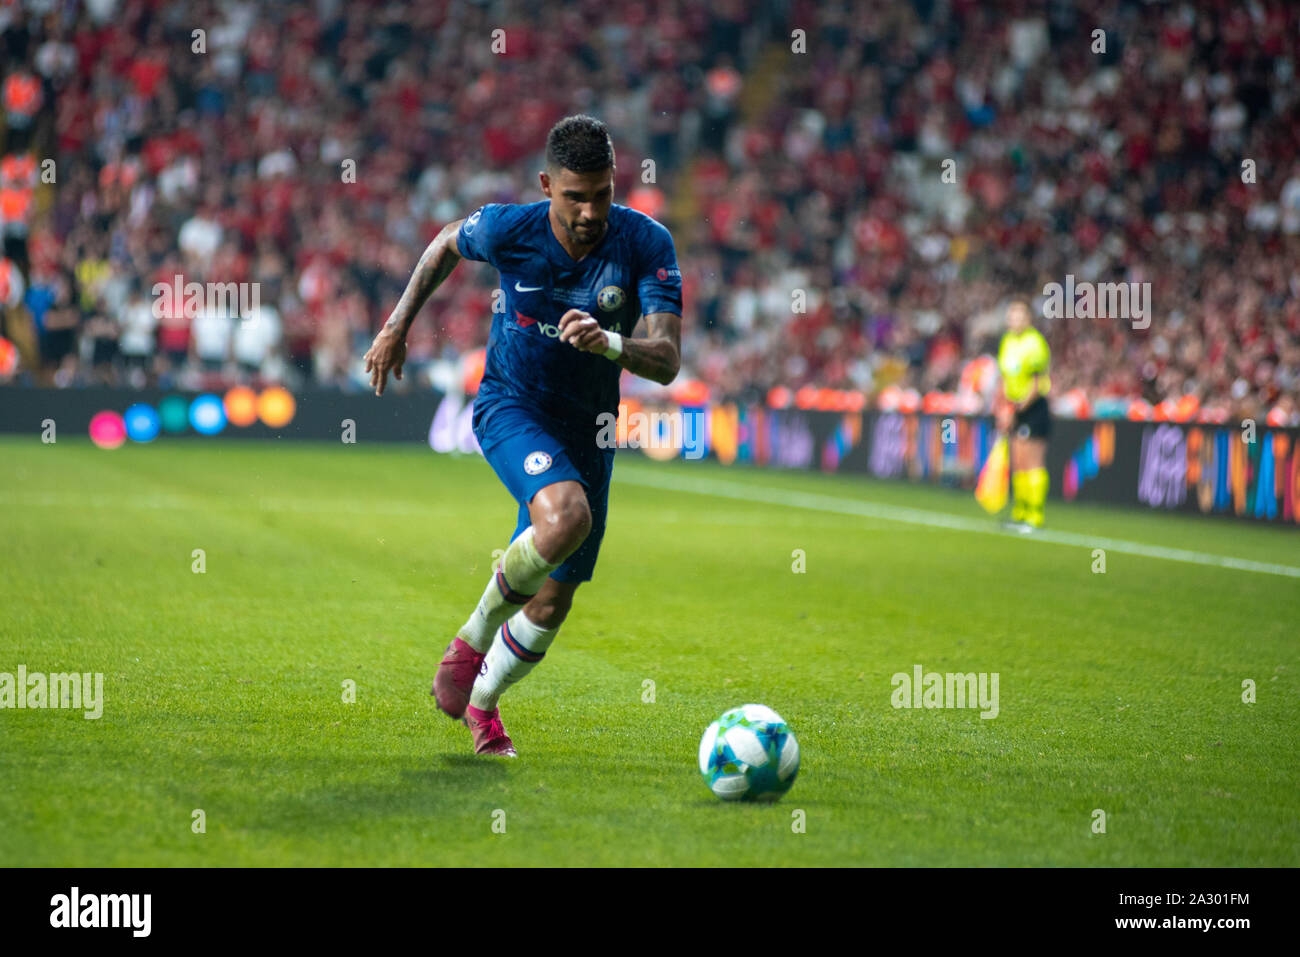 Istanbul, Turkey - August 14, 2019: Emerson during the UEFA Super Cup Finals match between Liverpool and Chelsea at Vodafone Arena Stock Photo